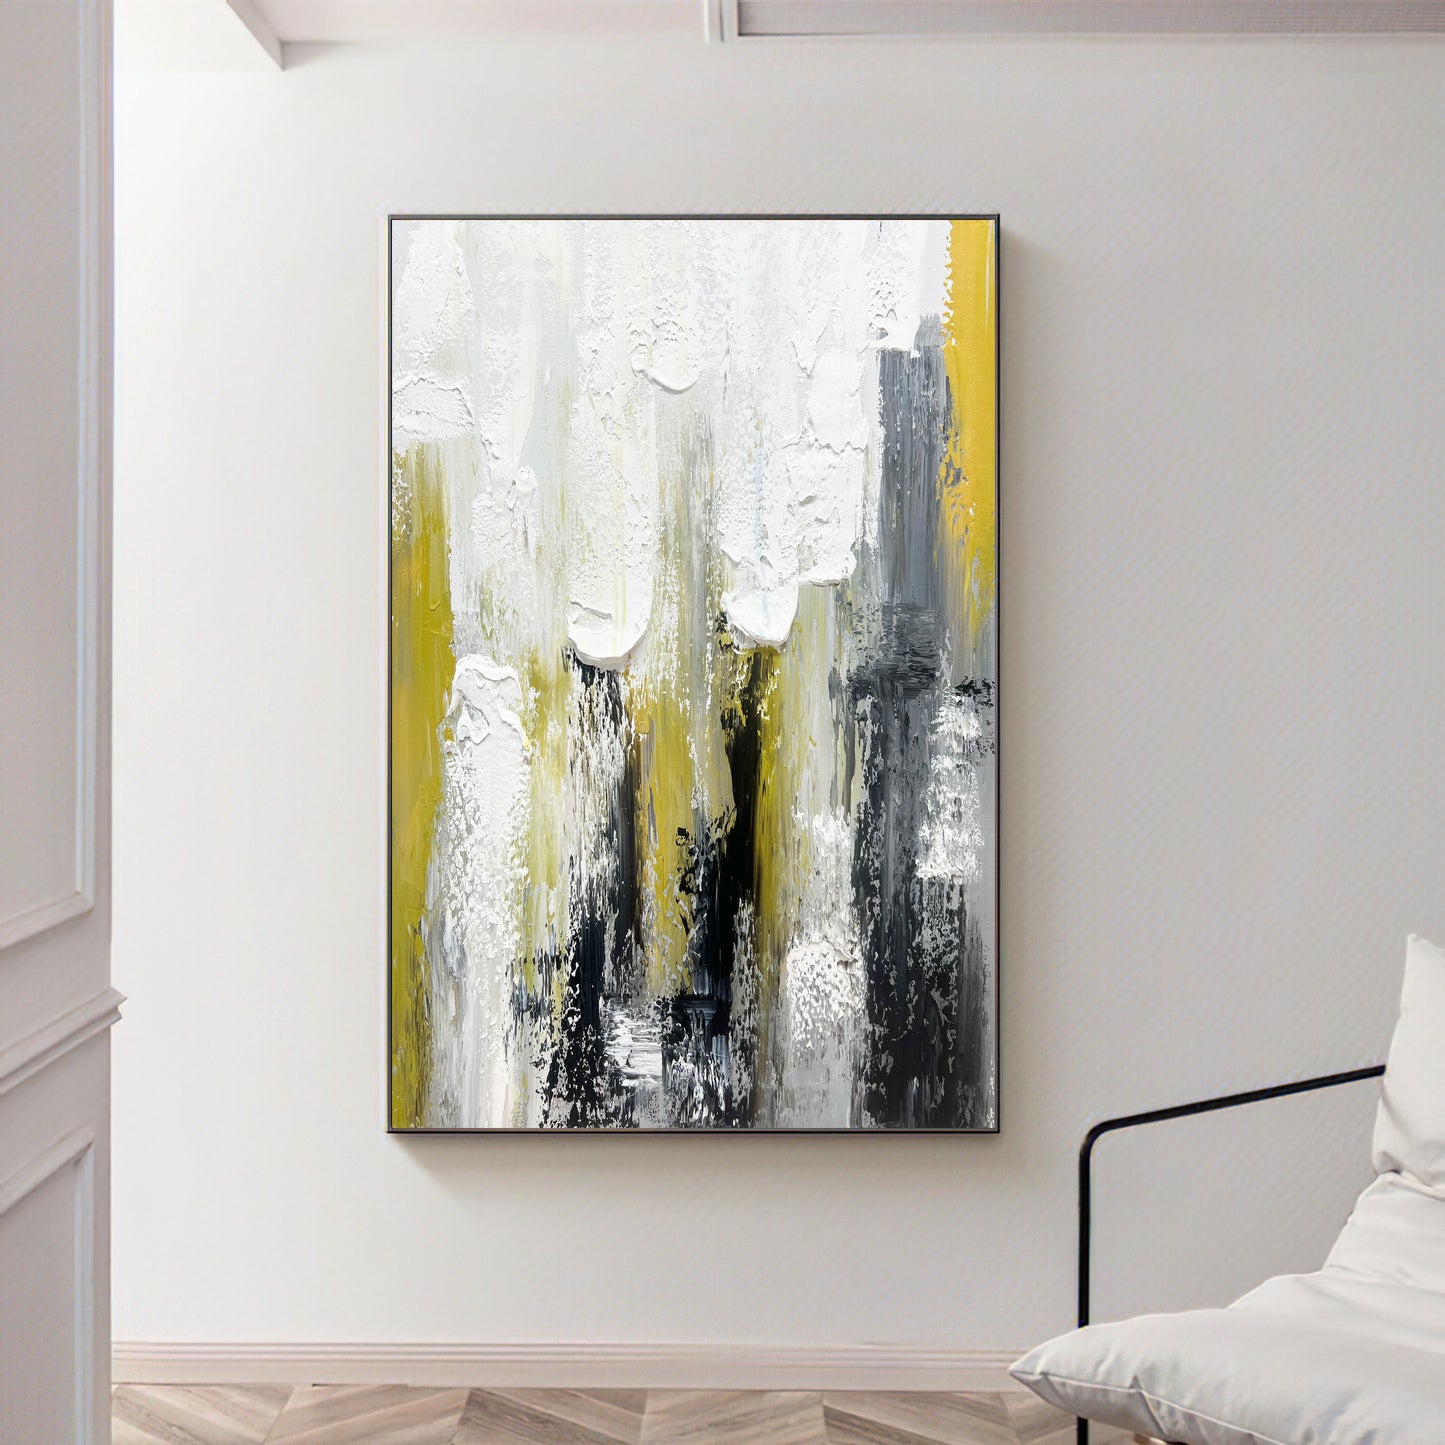 Large Acrylic Oil Painting On Canvas,Abstract Painting Canvas